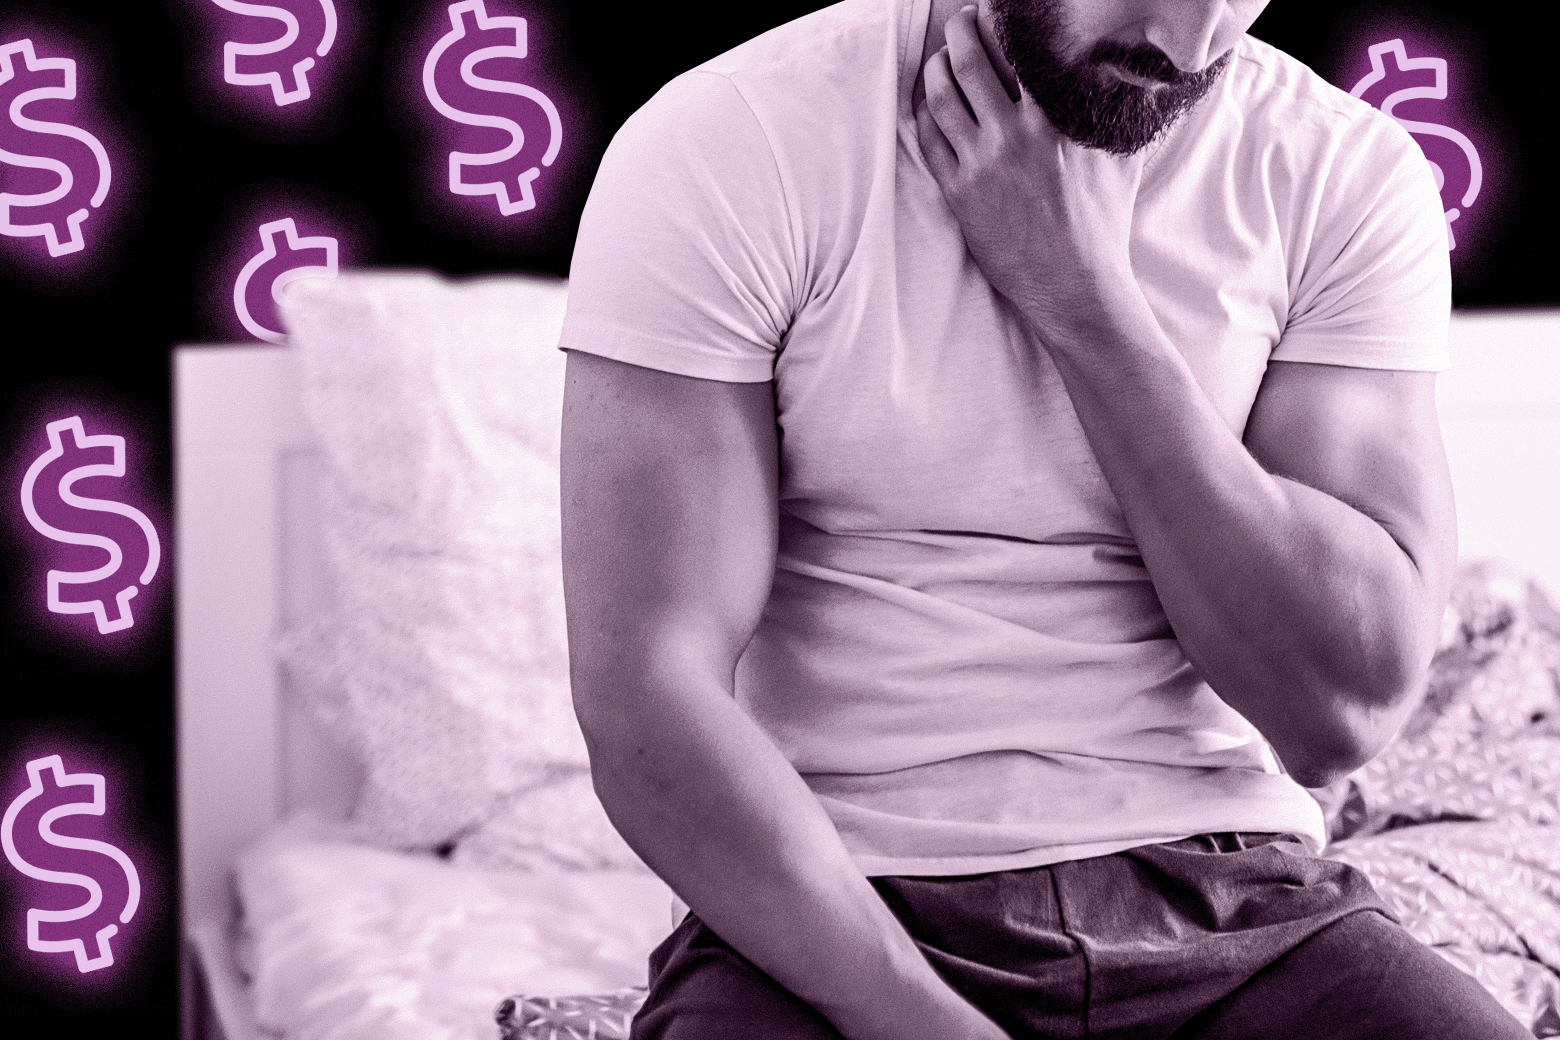 Is it unhealthy to pay your friends for sex? Because I just did.